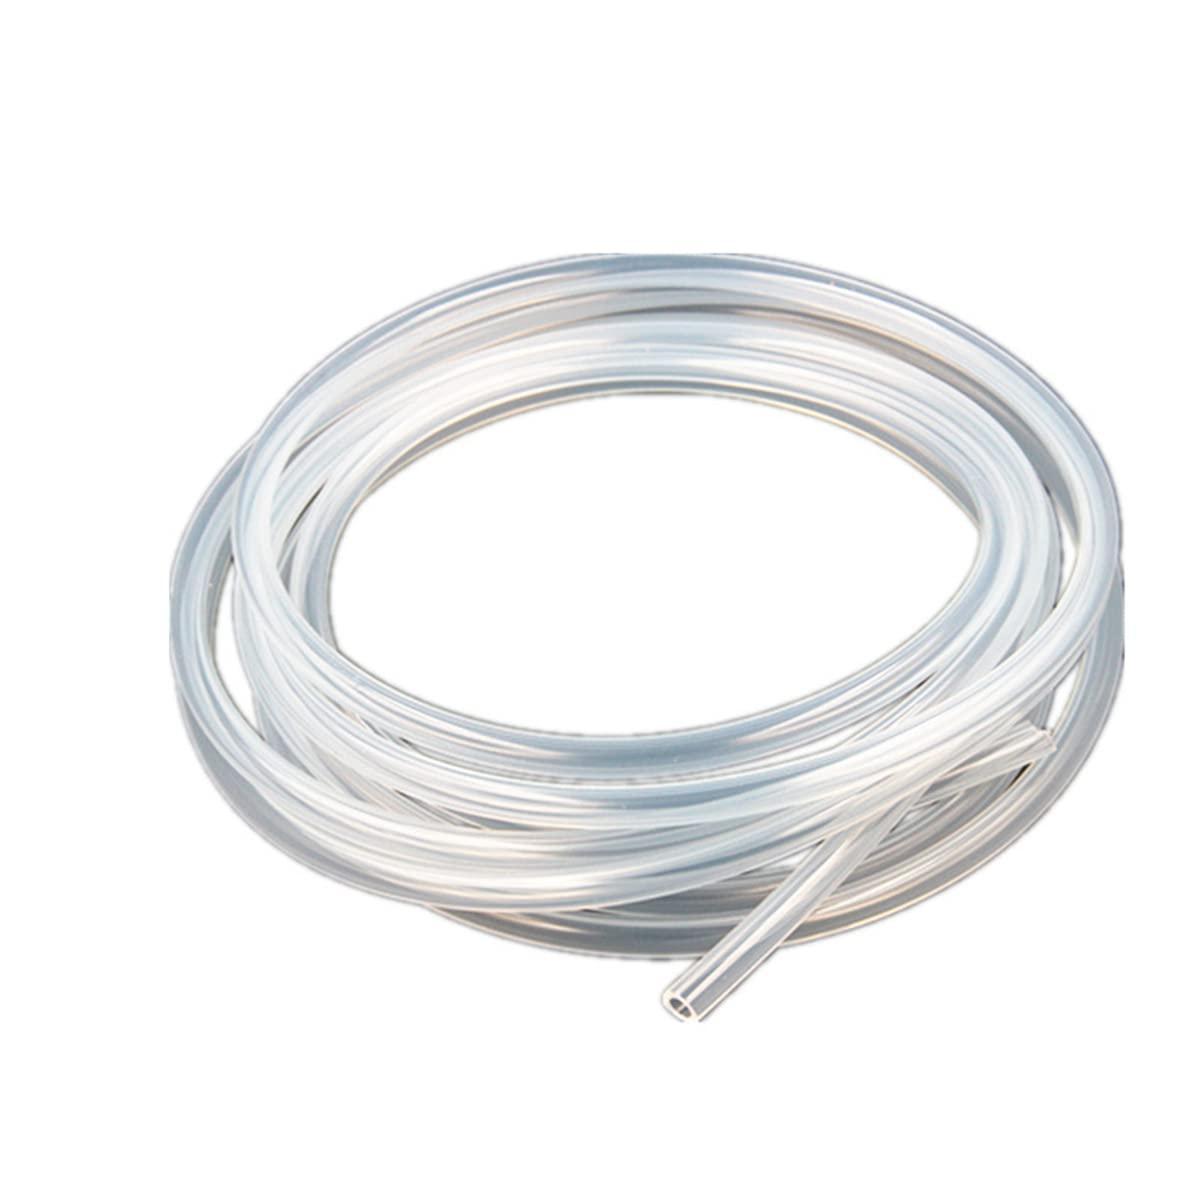 MACHSWON Silicone Tube 4mm ID 7mm OD 6.56ft Transparent Silicone Rubber Tube Silicone Tube Food Grade Air Hose for Pump Transfer 2m